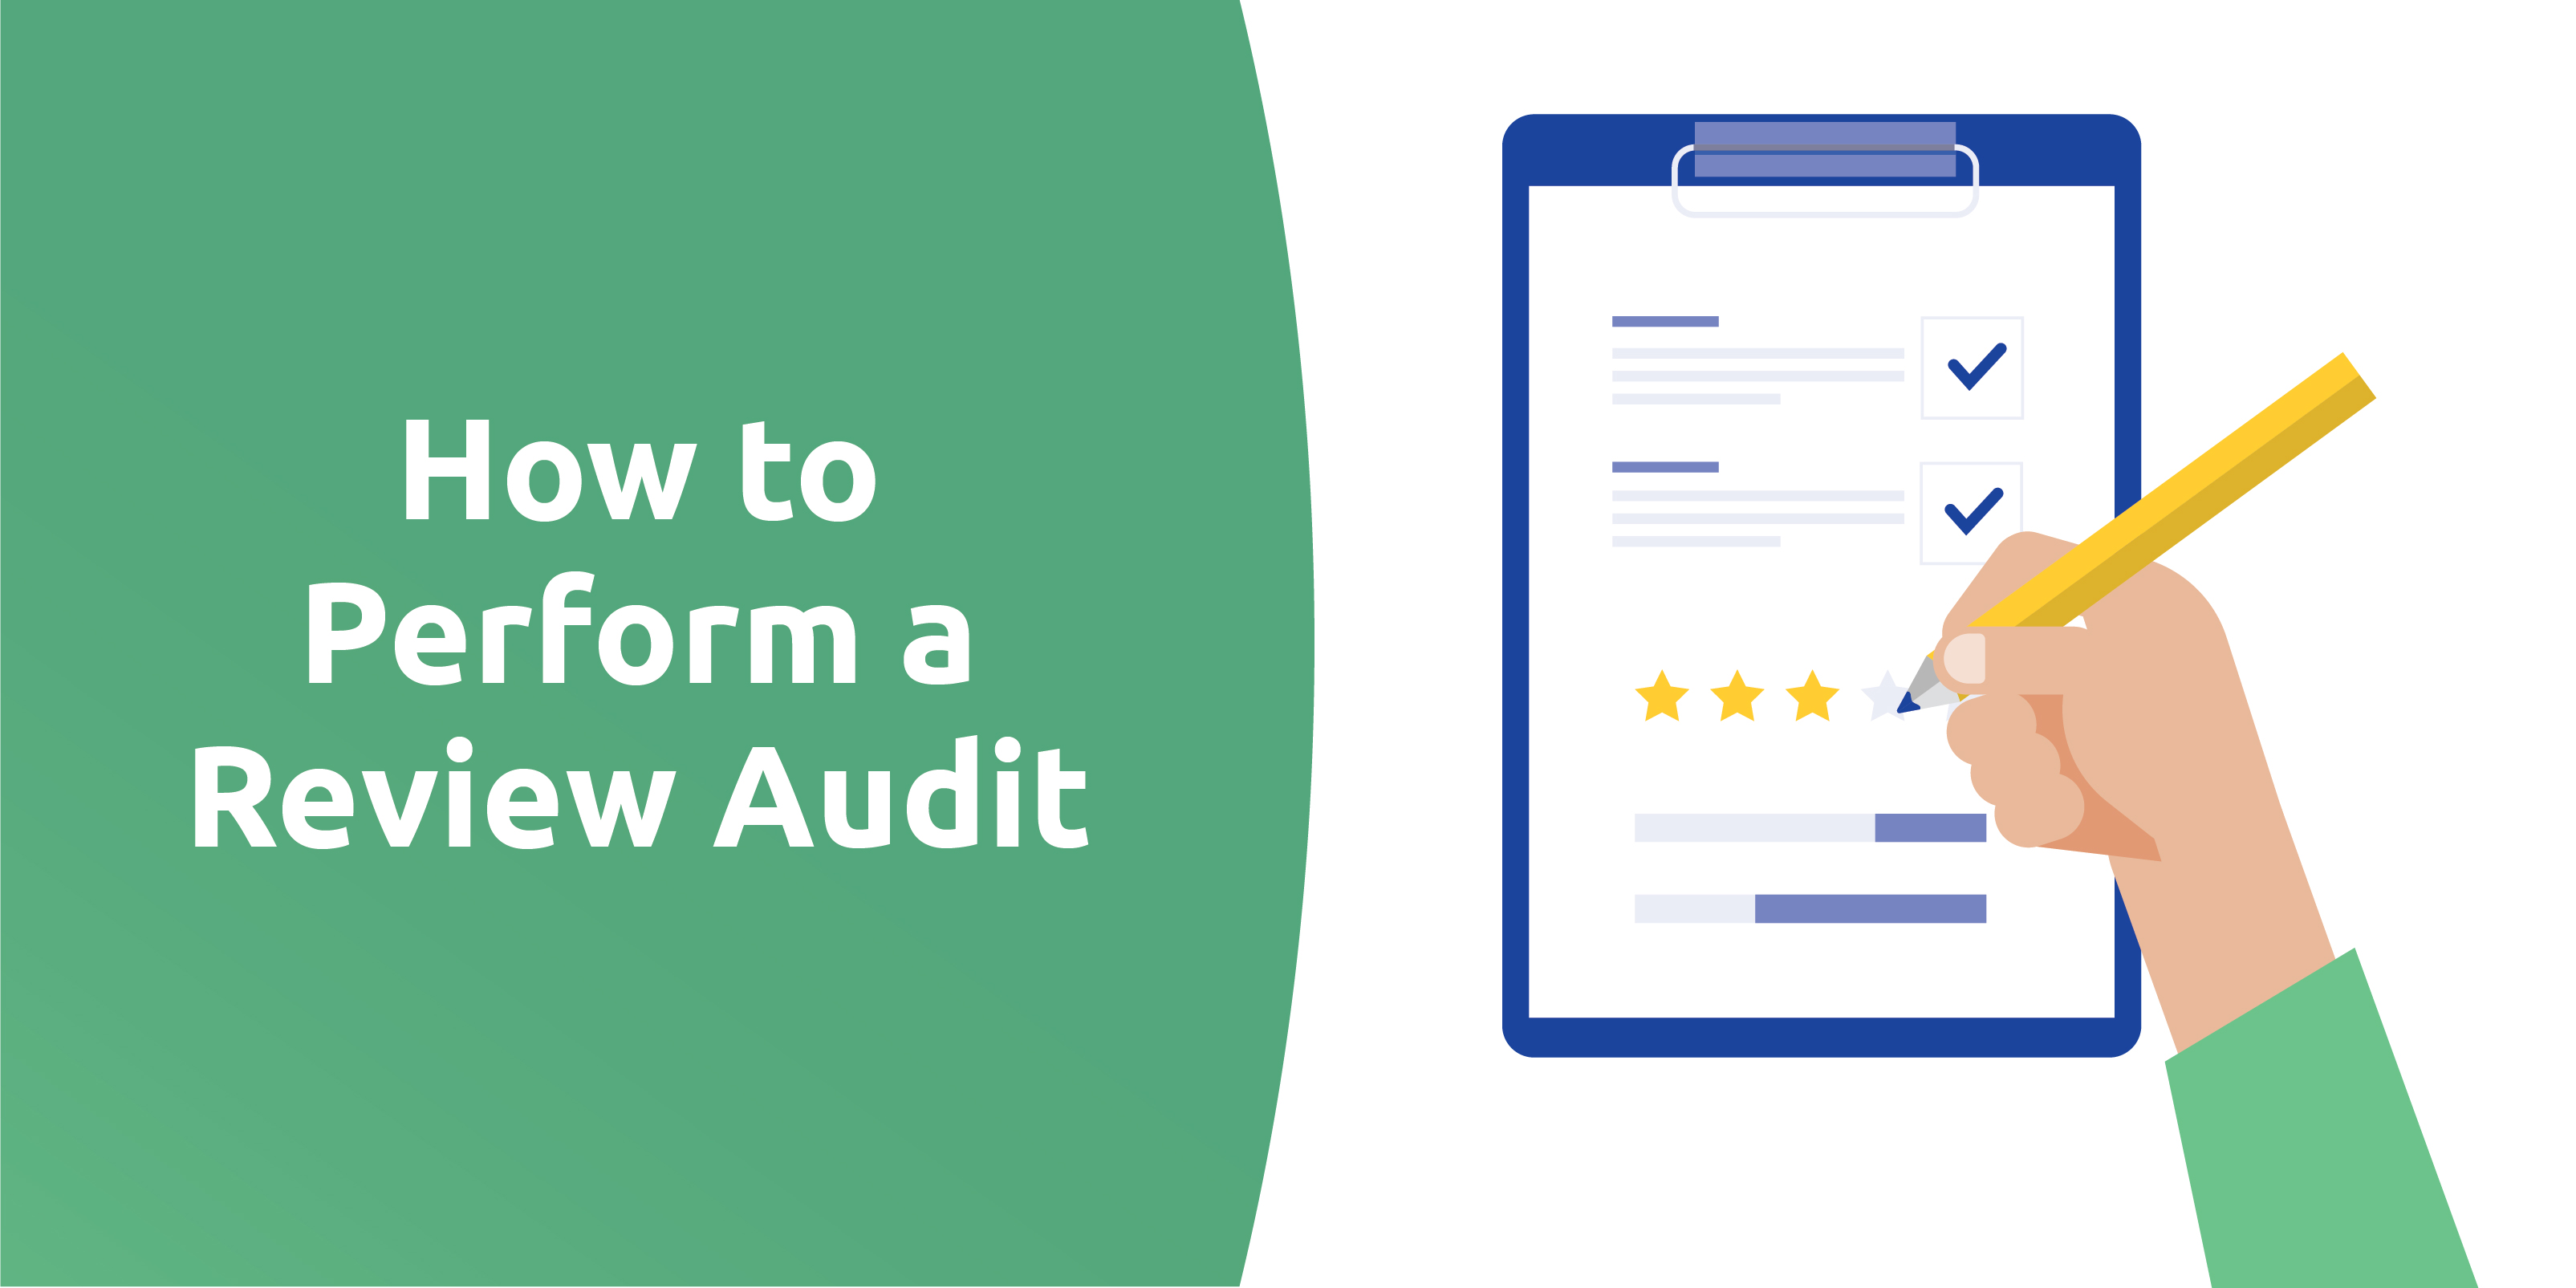 How to Perform a Review Audit